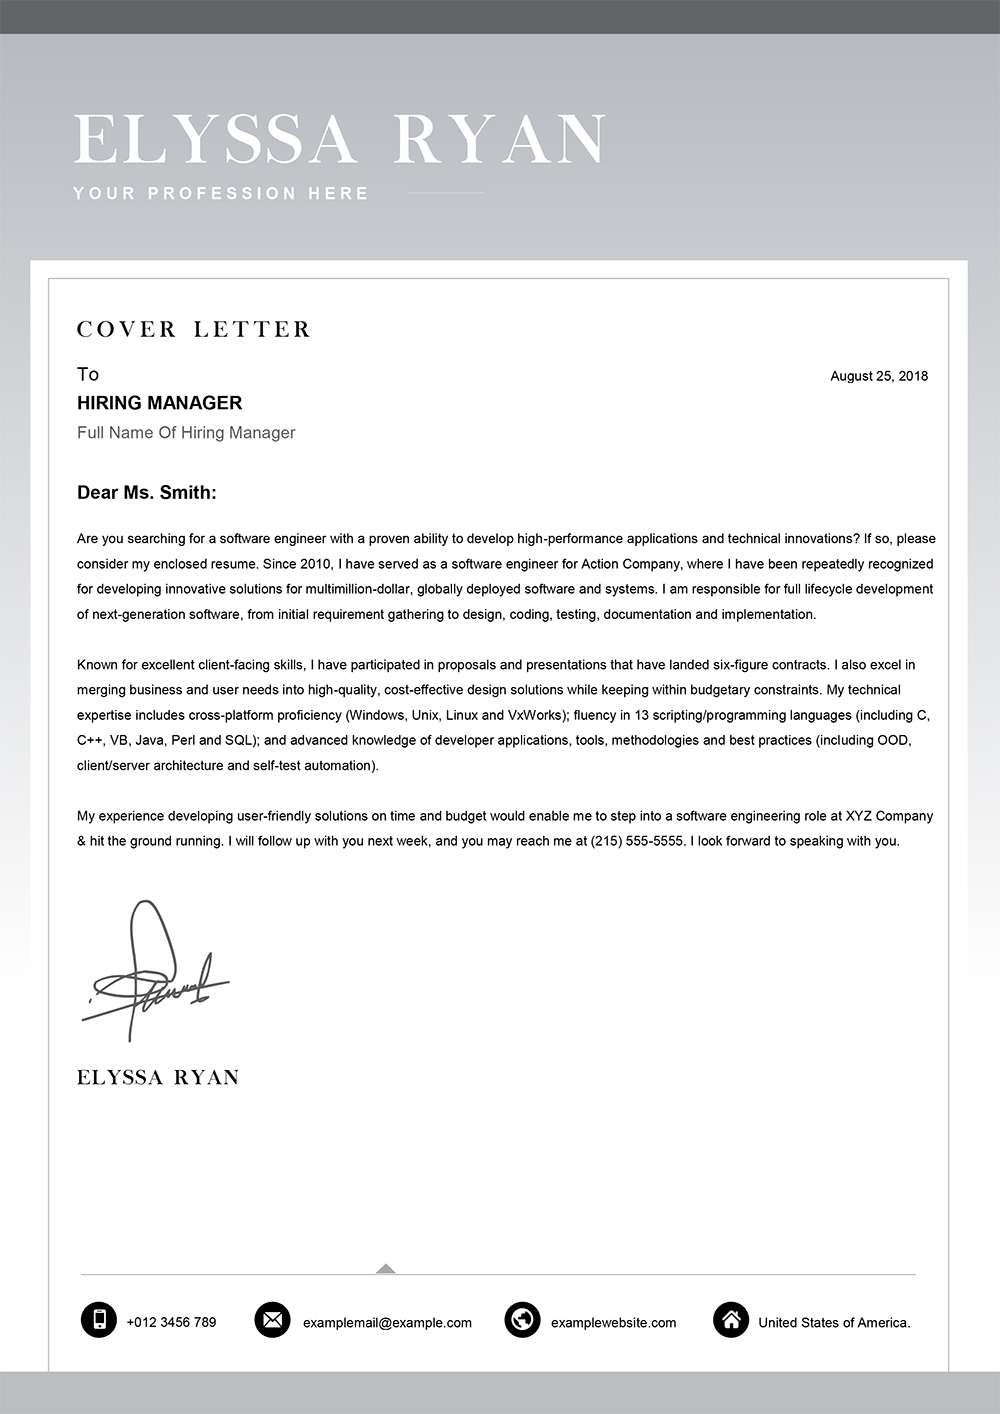 Functional Cover Letter Template - Cover Letter Templates ...